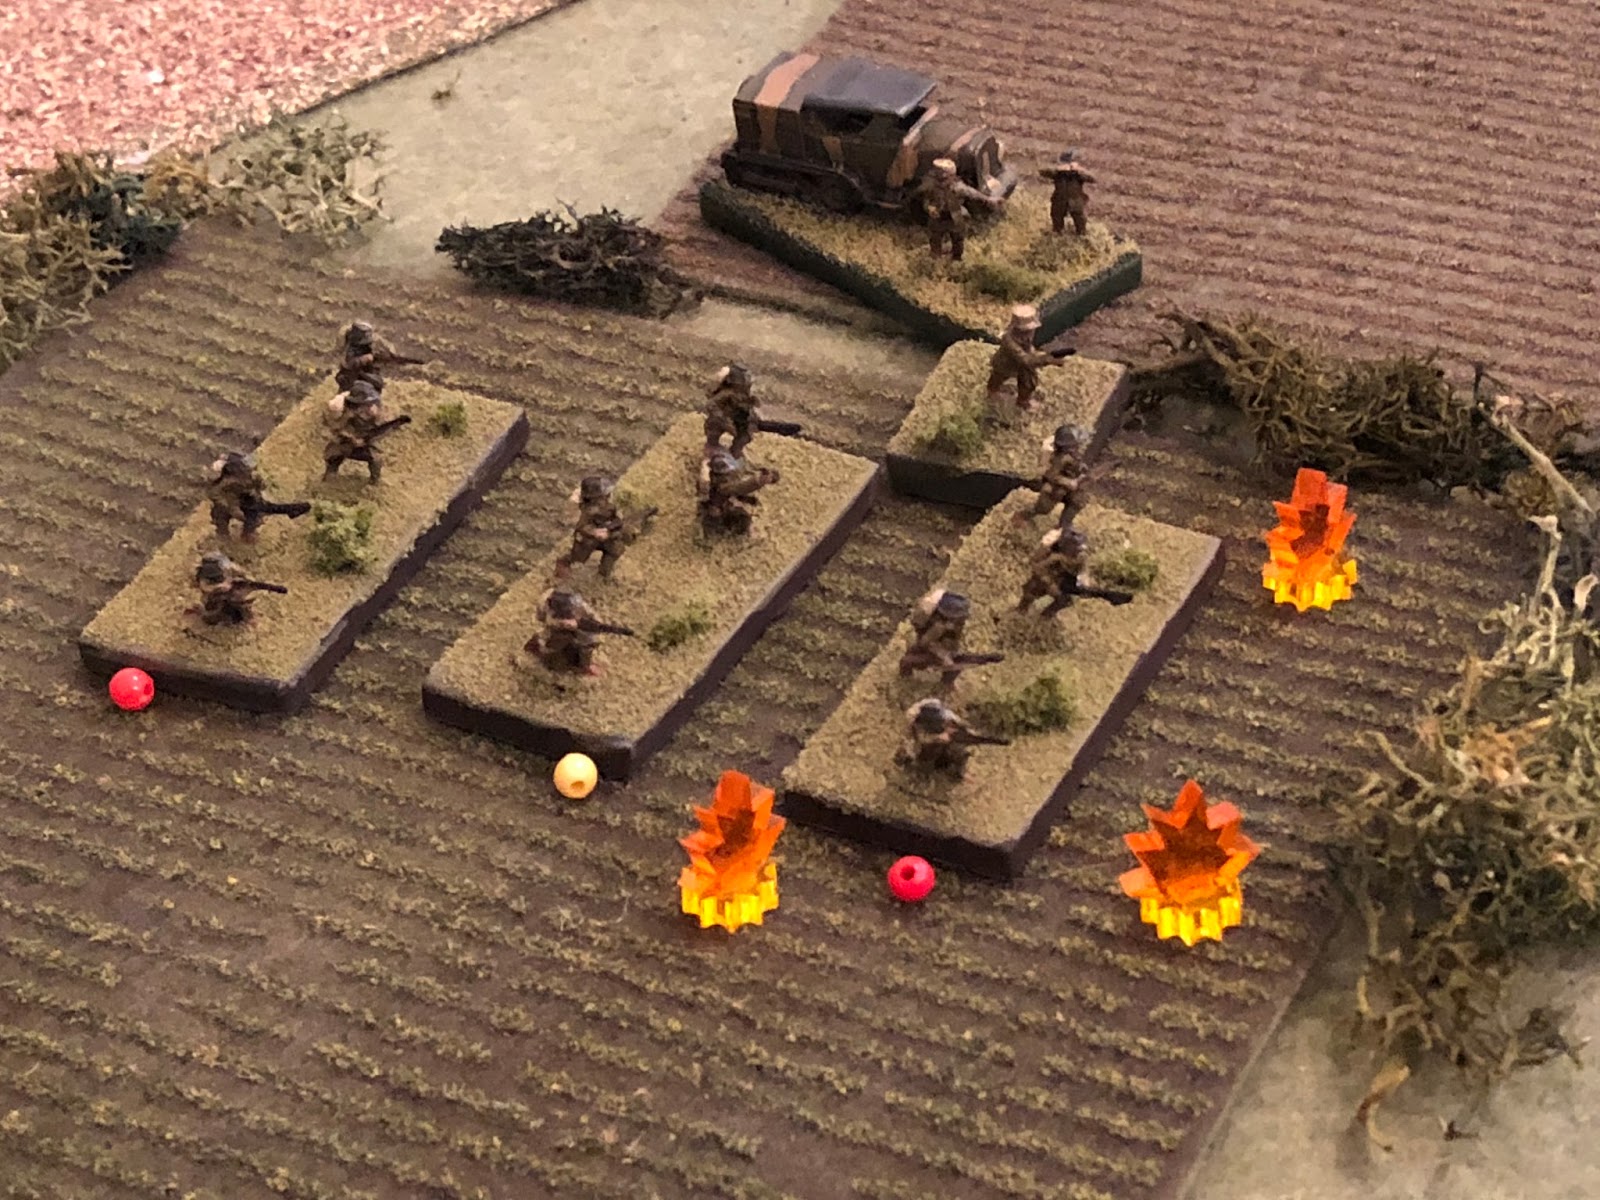  The French officers in the south set about rallying their 1st Platoon, under fire.   